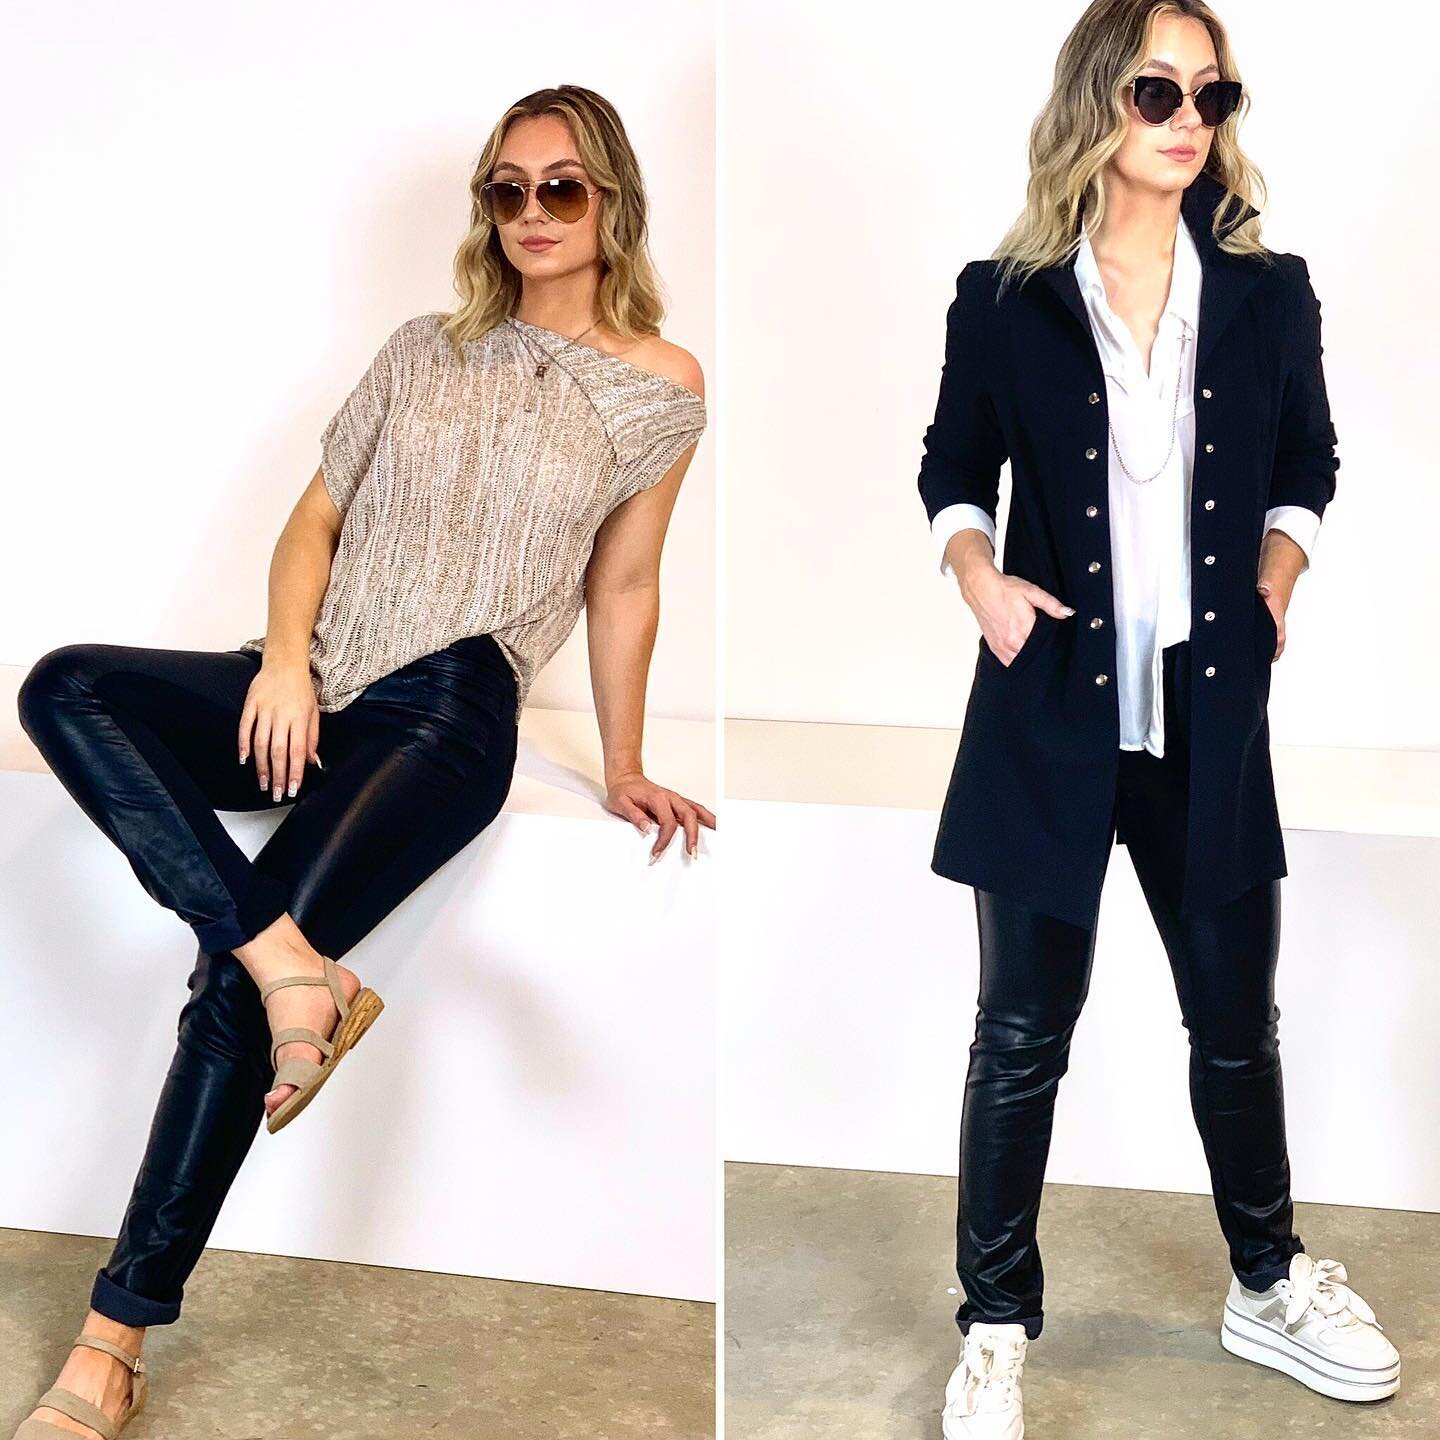 Styling the most flattering vegan leather jeans....
Shop Best selling basics online!!!
Leatherette jeans, fabric back, washable, the most versatile addition to your autumn/winter looks! 
The famous Magic Jacket, a flattering, everyday style piece! 
S